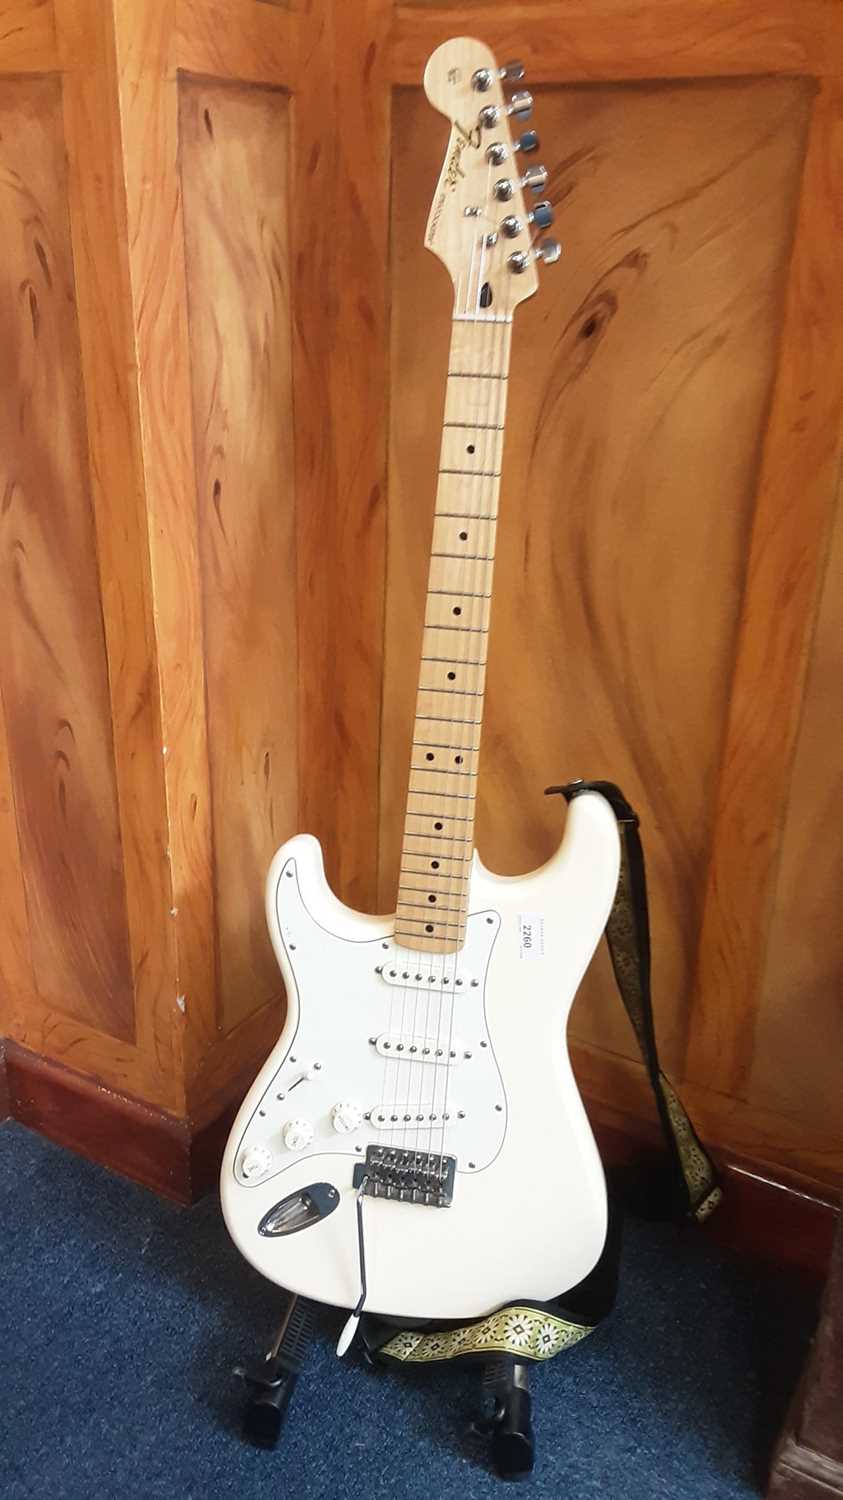 Lot 2260 - Fender Stratocaster left-handed electric six string guitar, official contour body in white/cream , model number 15636022 , made in Mexico. 
£250/350